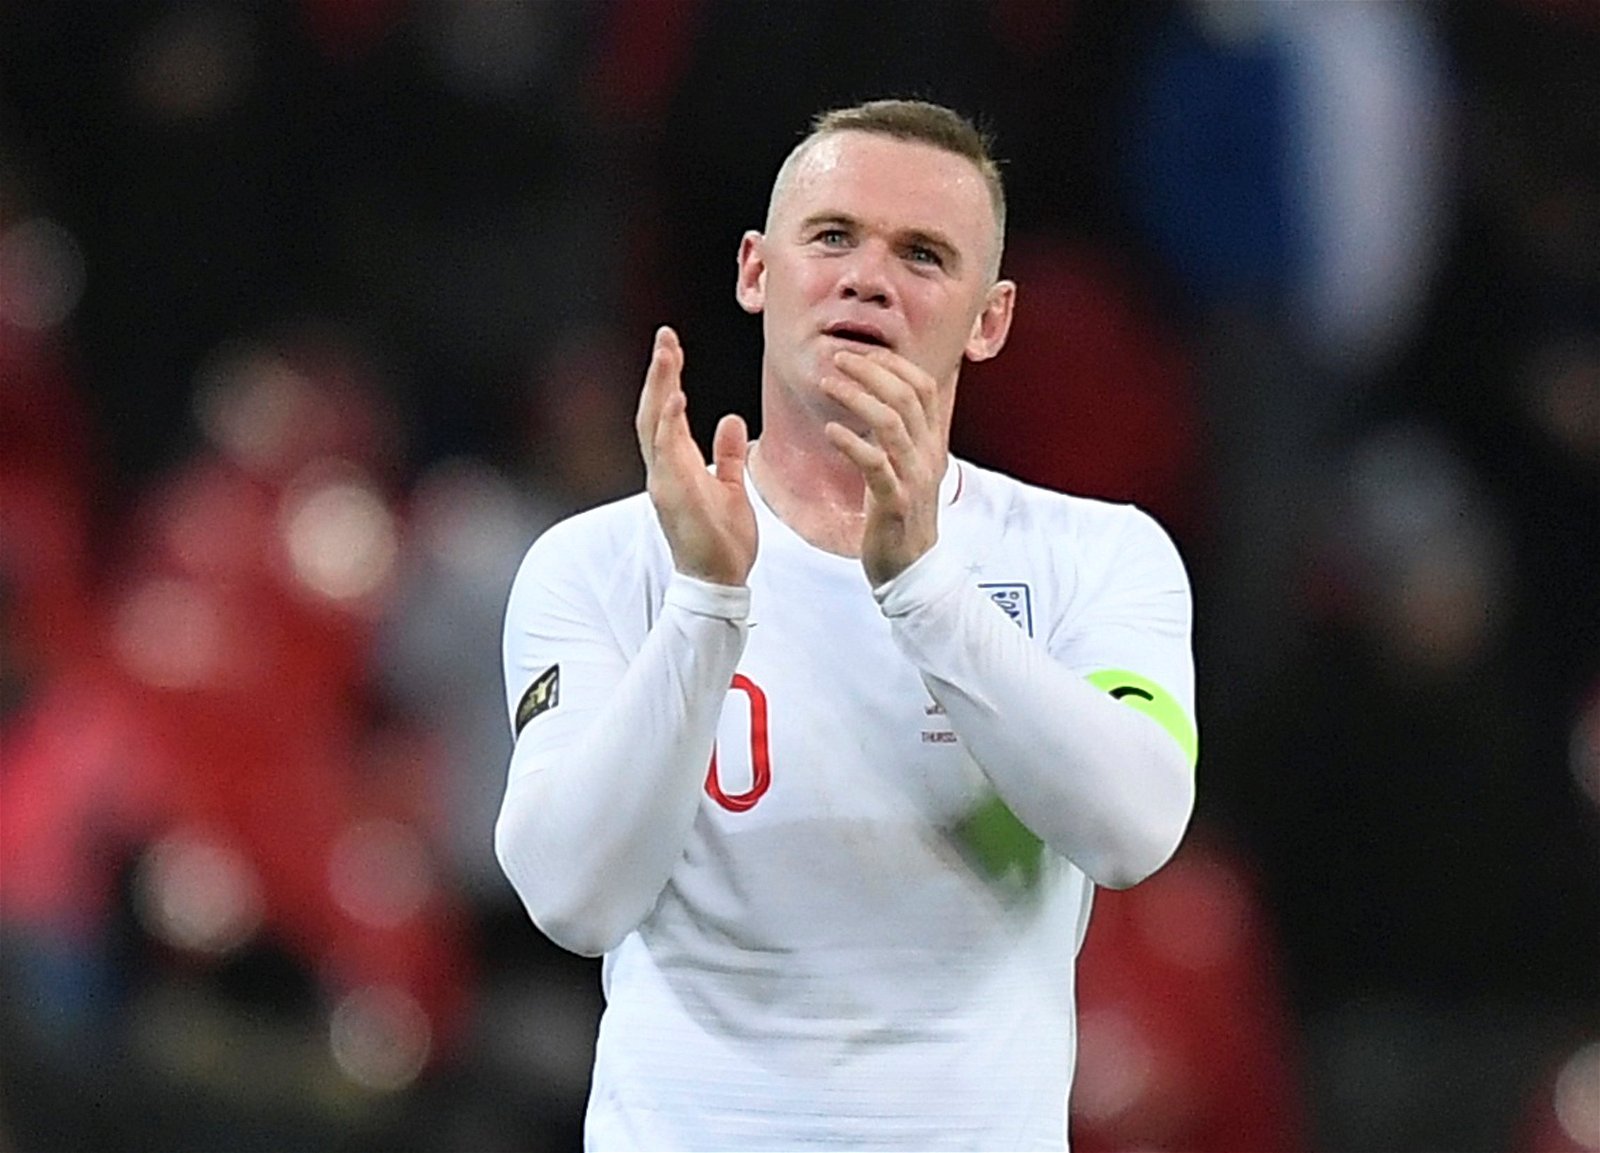 OFFICIAL: Wayne Rooney Agrees To Join Derby County In January 2020